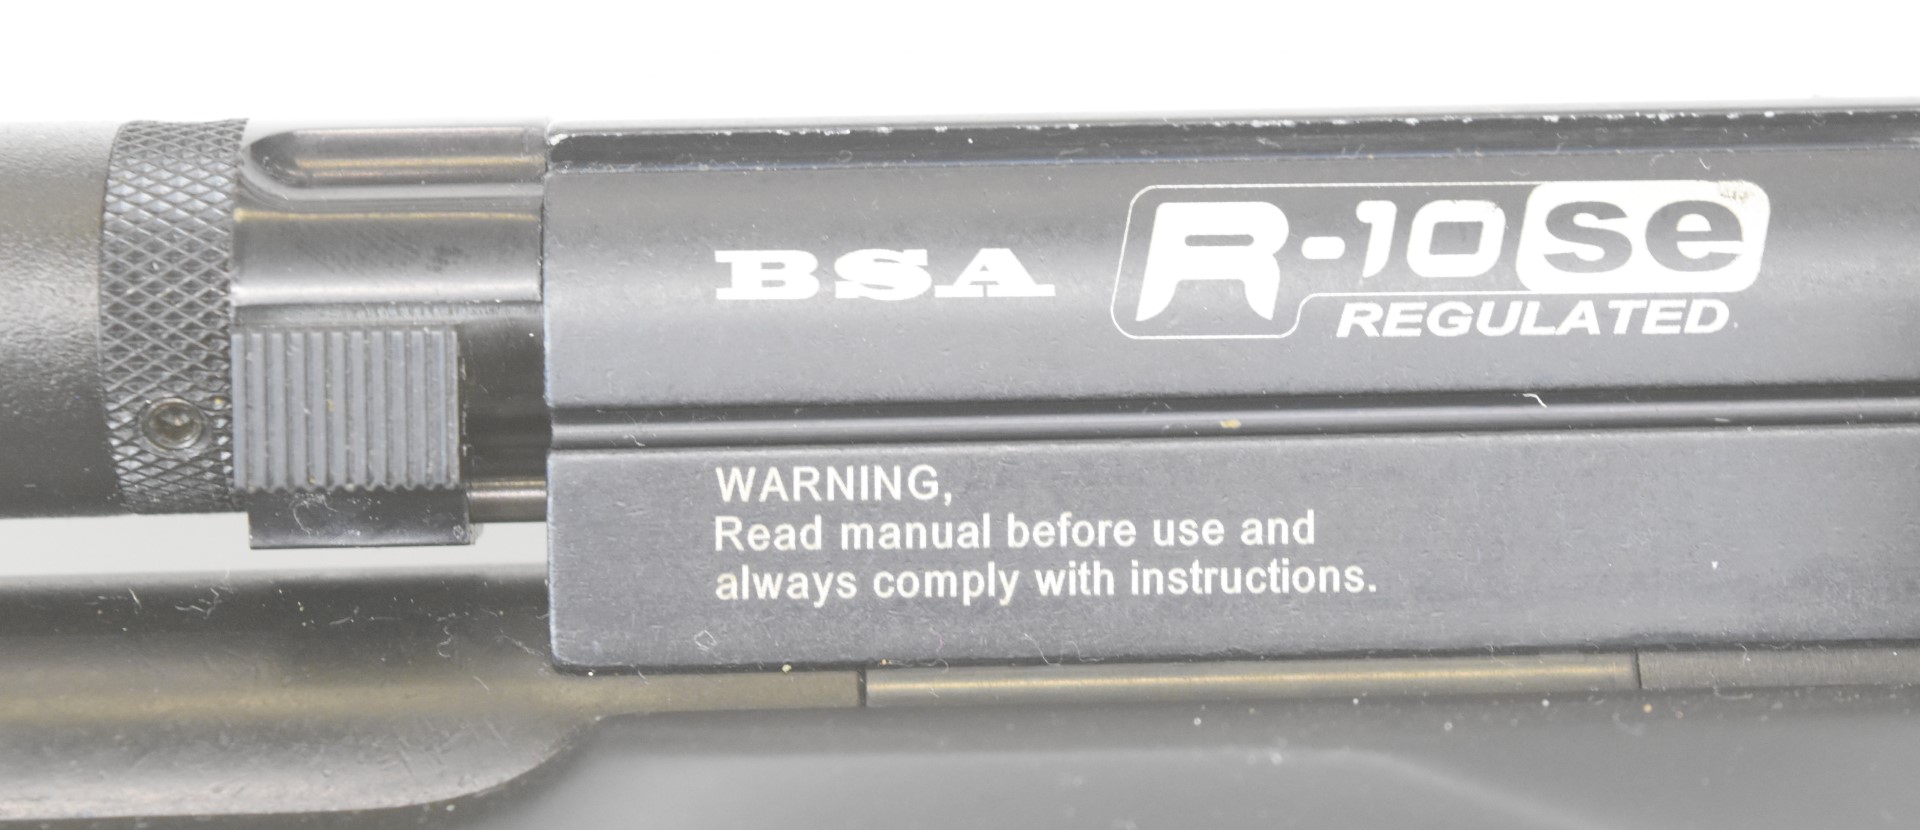 BSA R-10 SE Regulated .177 PCP air rifle with textured semi-pistol grip and forend, raised cheek - Image 19 of 22